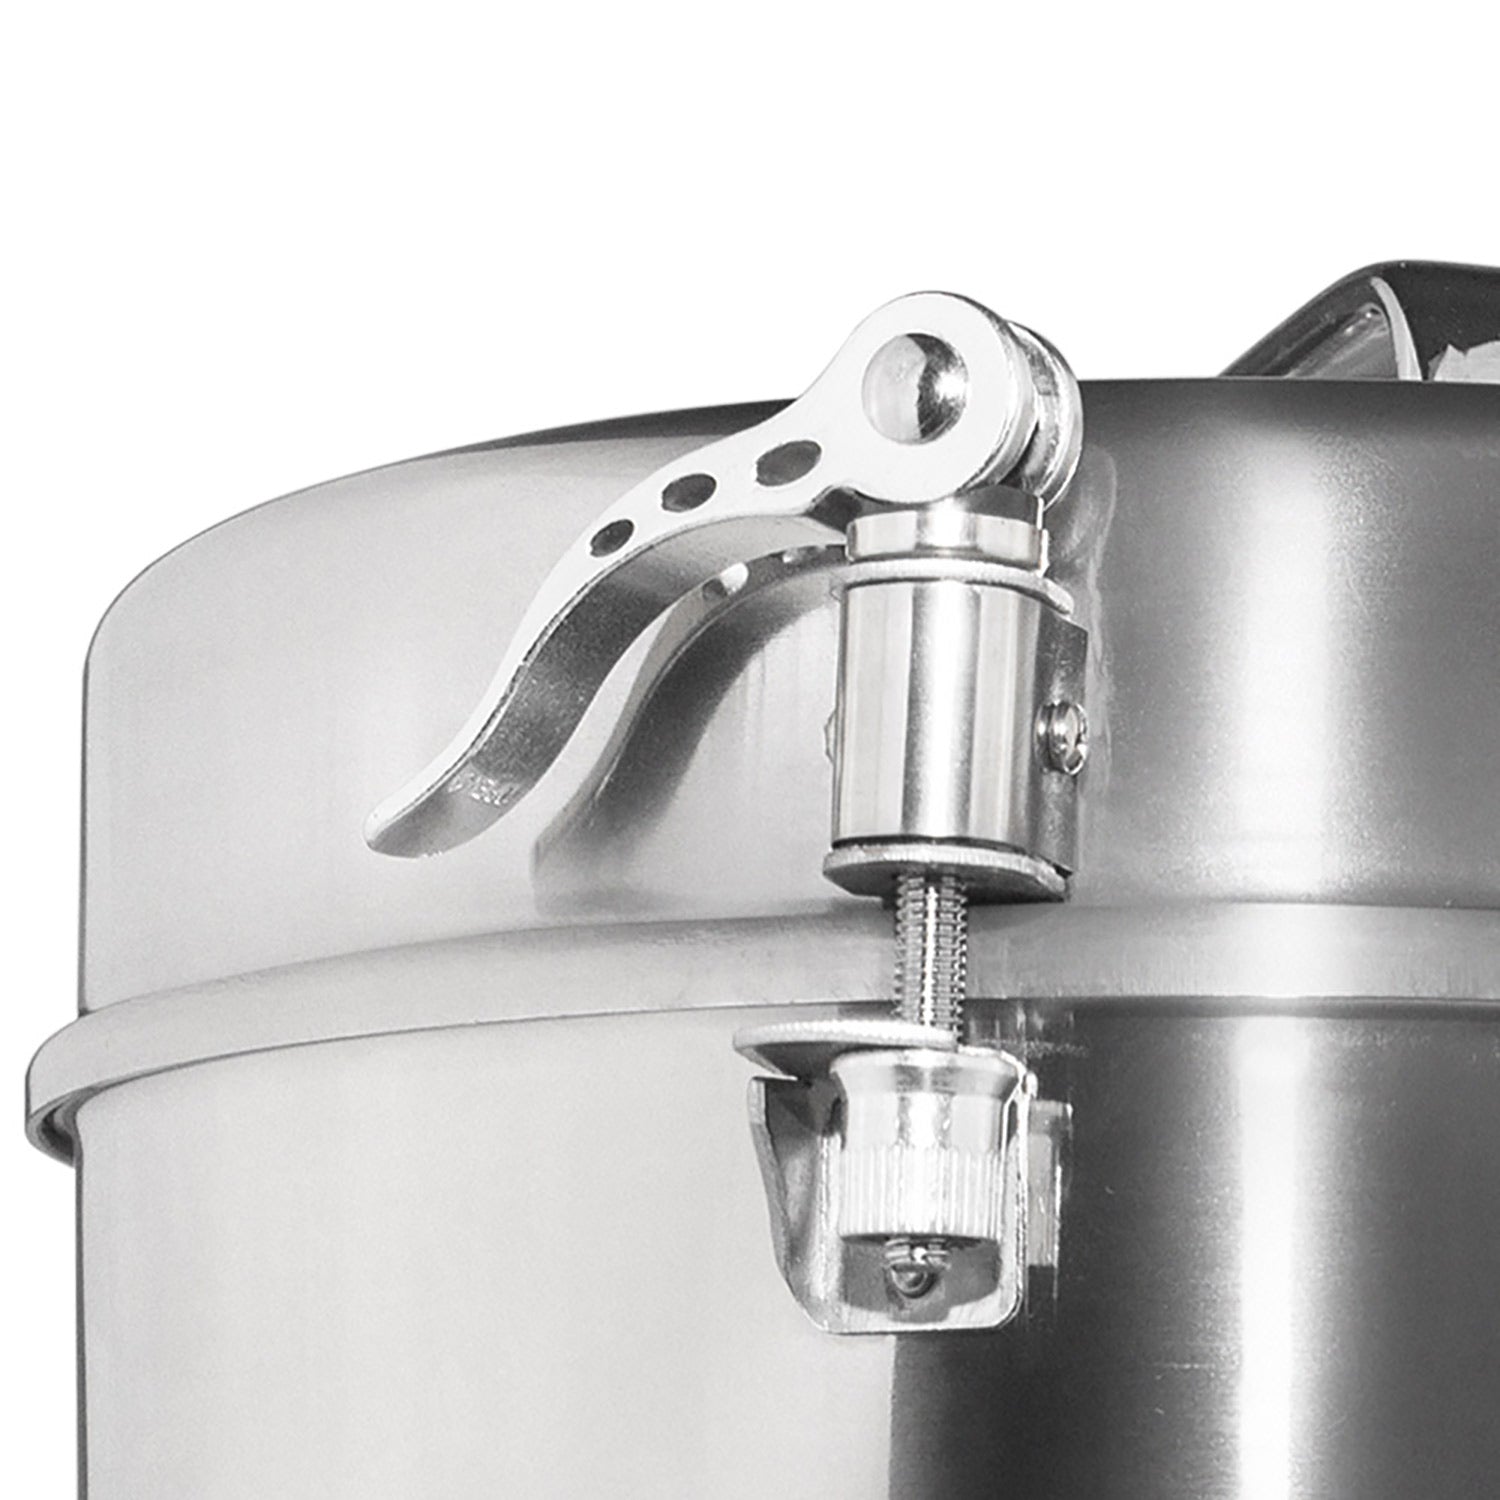 GR-V350 Grain Mill Commercial | Electric Wheat Grinder | 350g | Spices and Herbs| Stainless Steel